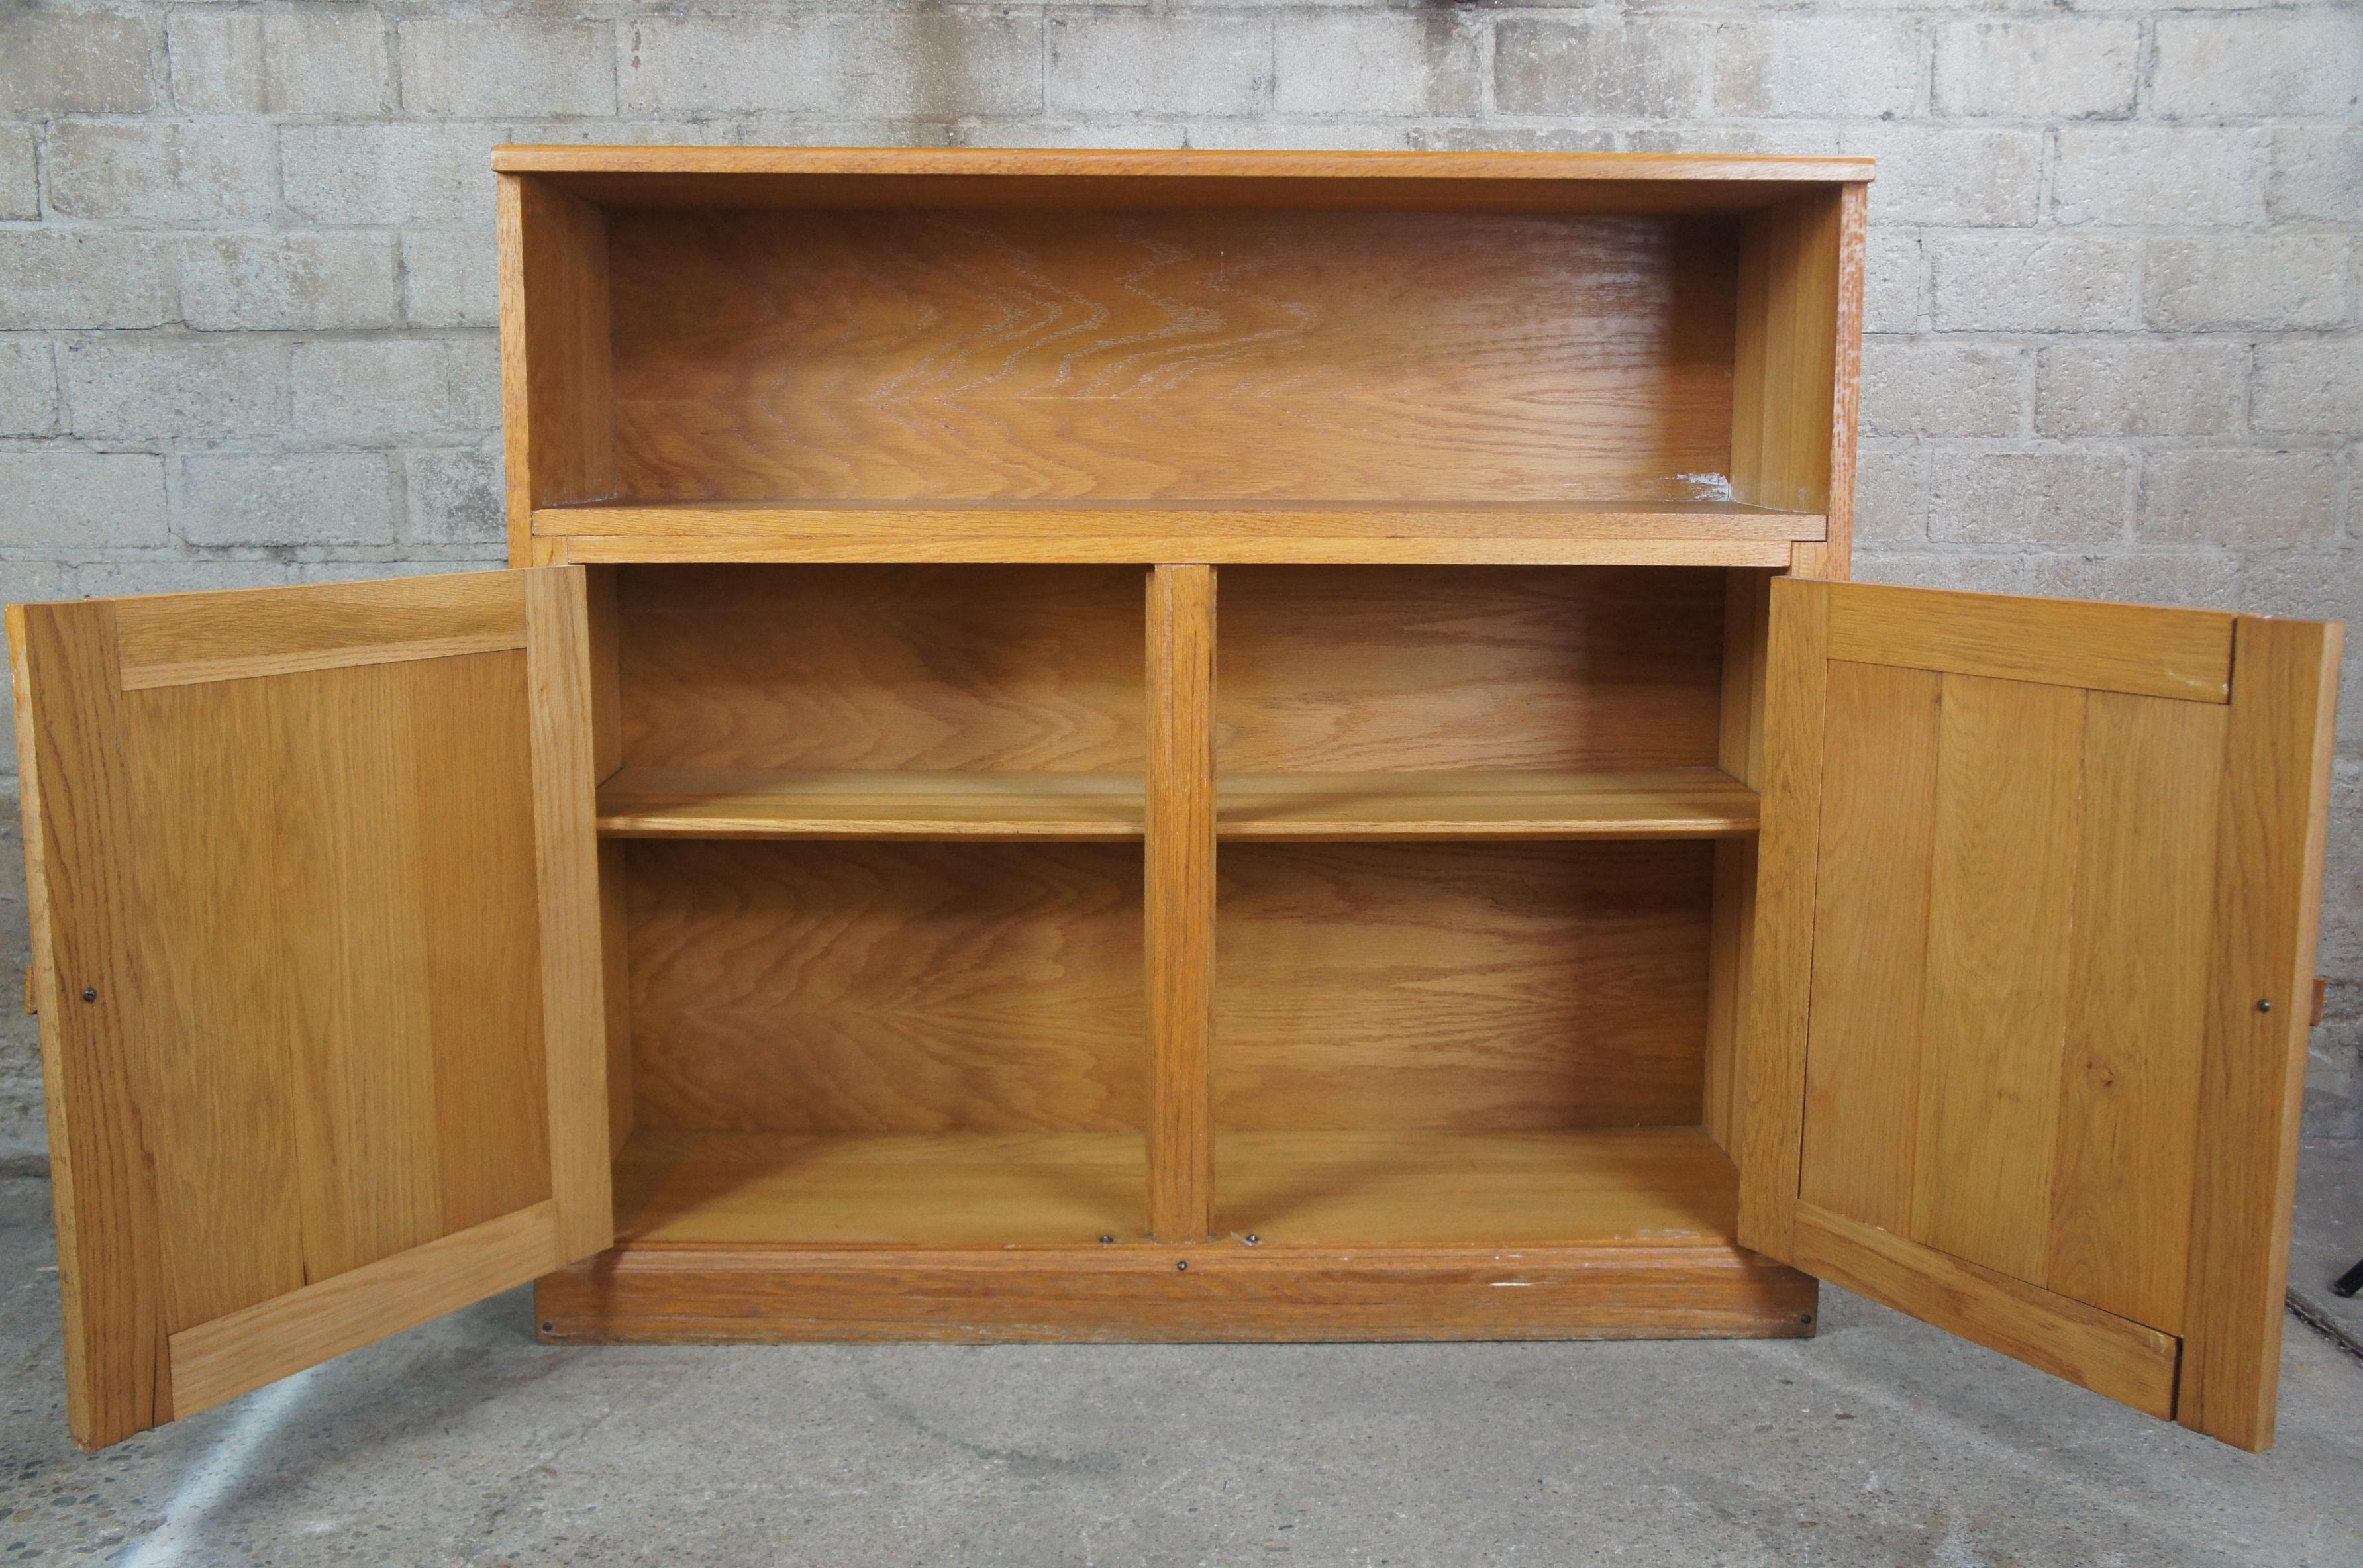 Mid-20th Century Brandt Ranch Oak Double Cabinet #1891N-8 Bookcase Console TV Stand Shelf